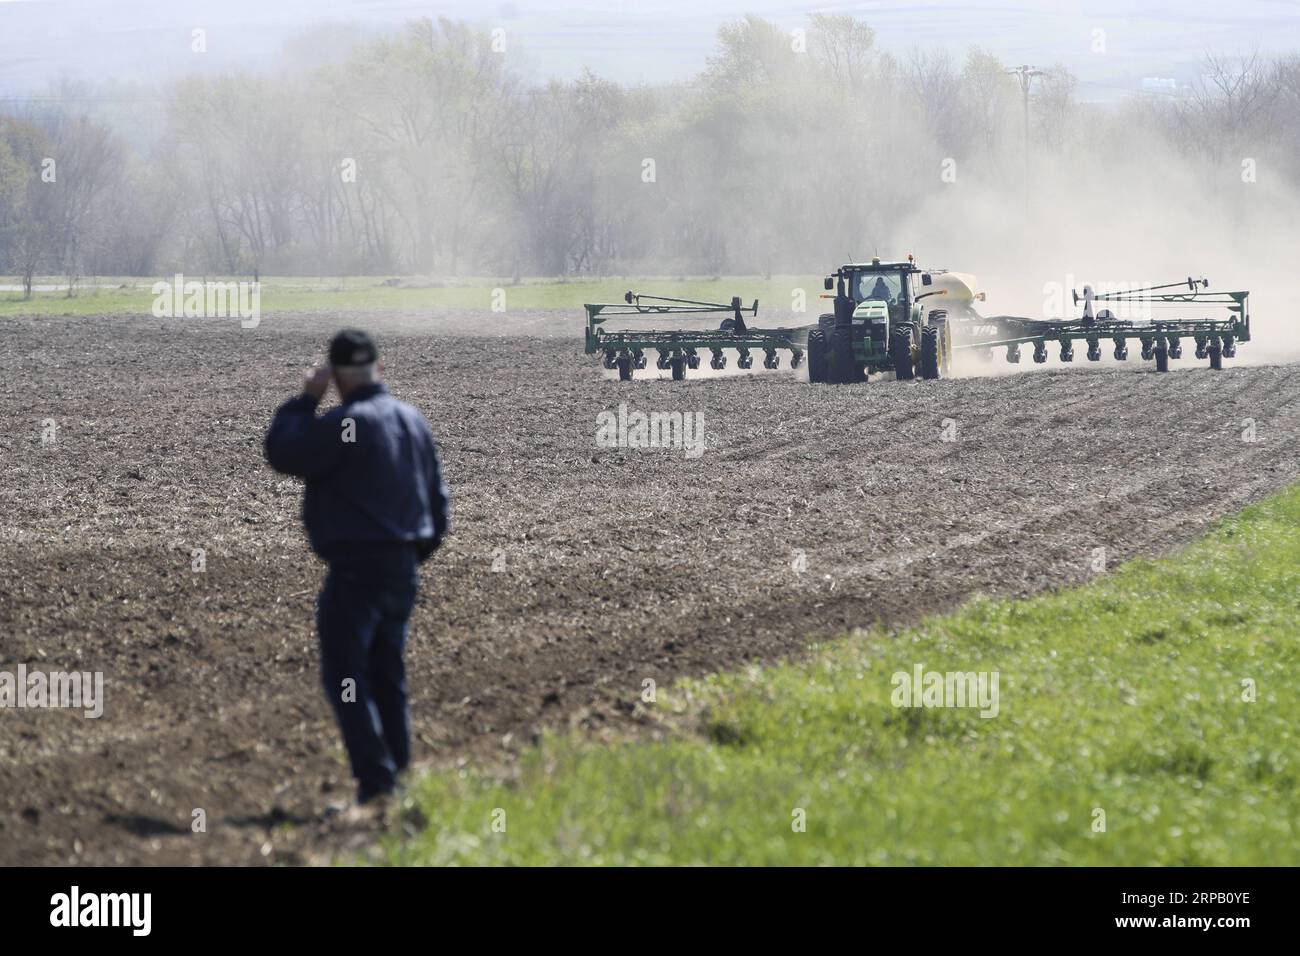 (190524) -- BEIJING, May 24, 2019 (Xinhua) -- Bill Pellett watches as his son Bret plants corn with a planter machine at their family farm in Atlantic of Cass county, Iowa, the United States, April 24, 2019. Bill Pellett knows how to farm, but just like most of his peers across the country, the 71-year-old farmer is feeling less assured of what he could get from a new year of farming, as there appears to be no quick resolution of the year-long trade disputes between the United States and China. TO GO WITH Spotlight: Leading U.S. farming state enters new crop season amid uncertainty over trade Stock Photo